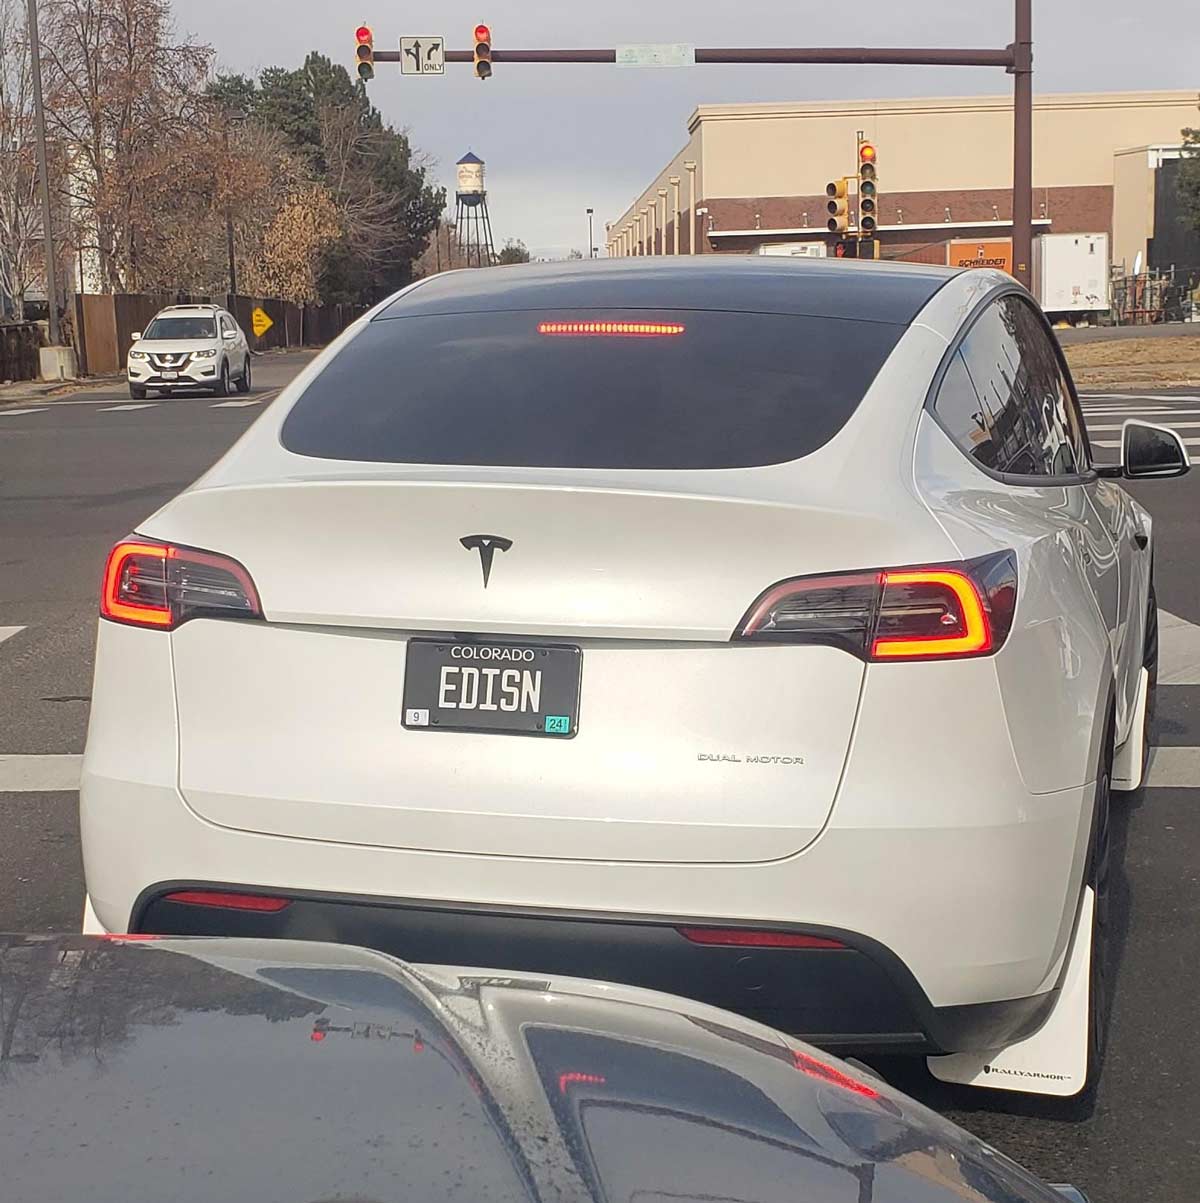 The plates on this tesla